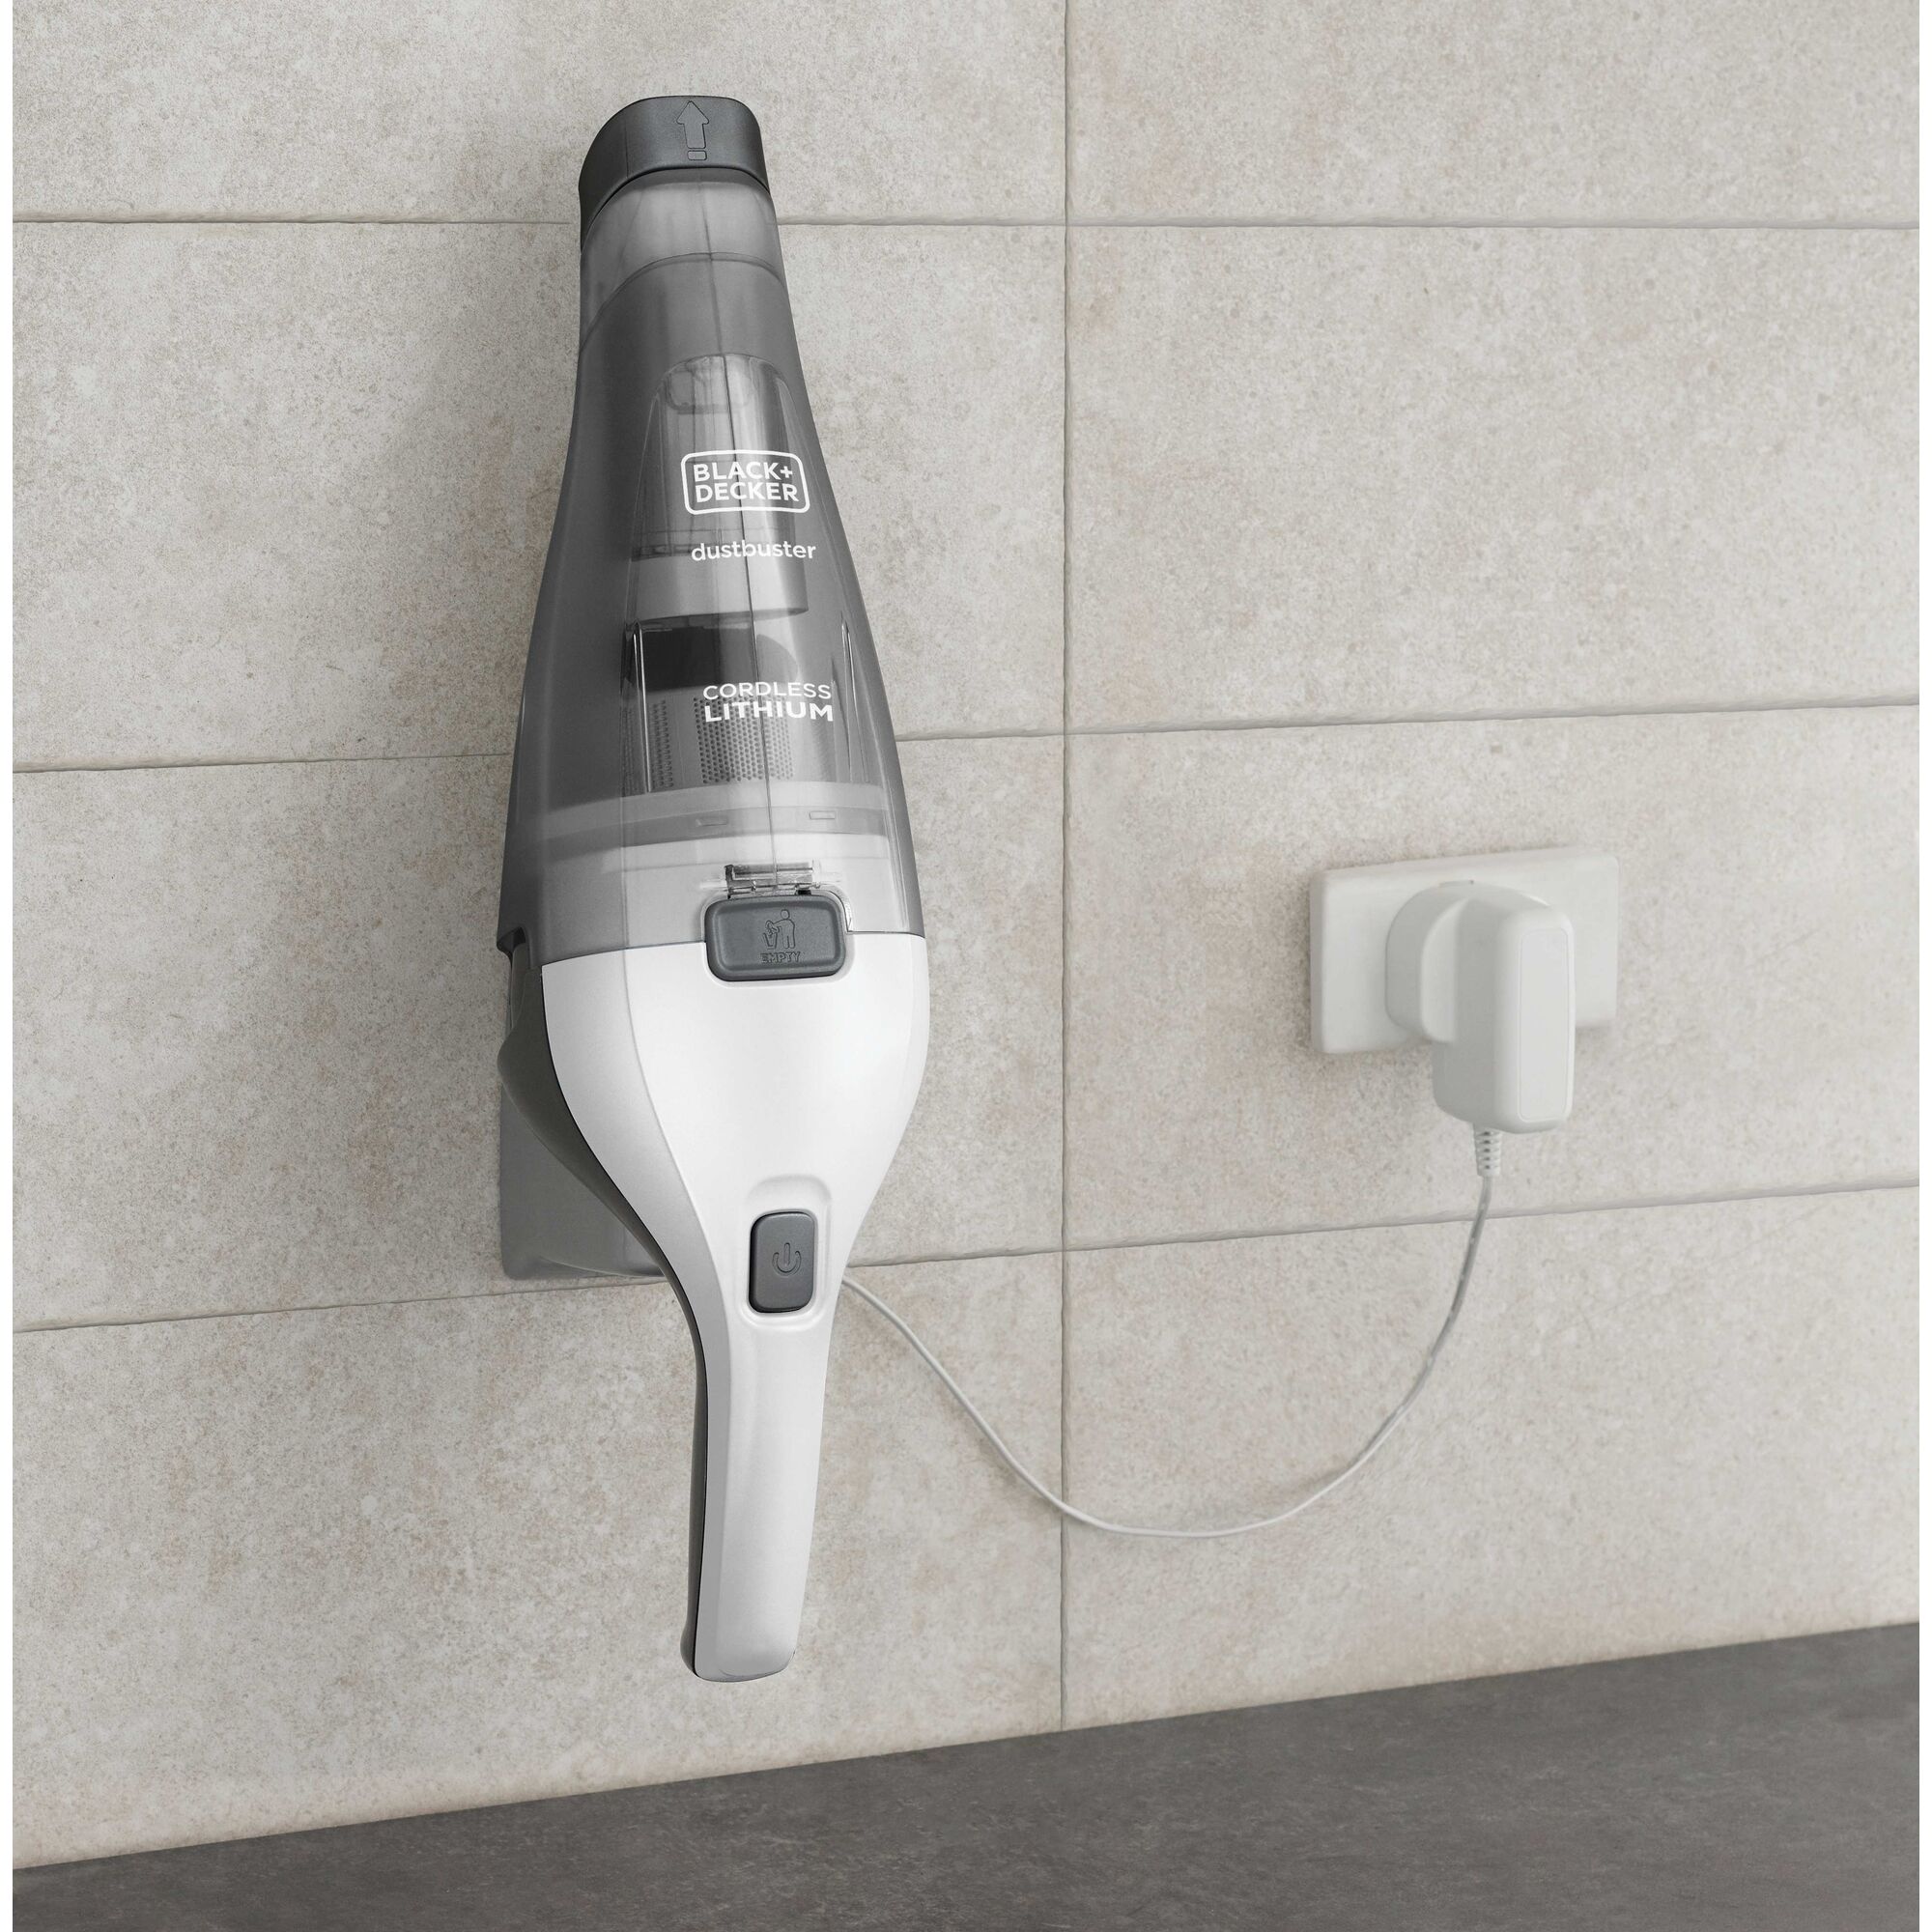 Wall mountable charger feature of dustbuster QuickClean cordless hand vacuum.